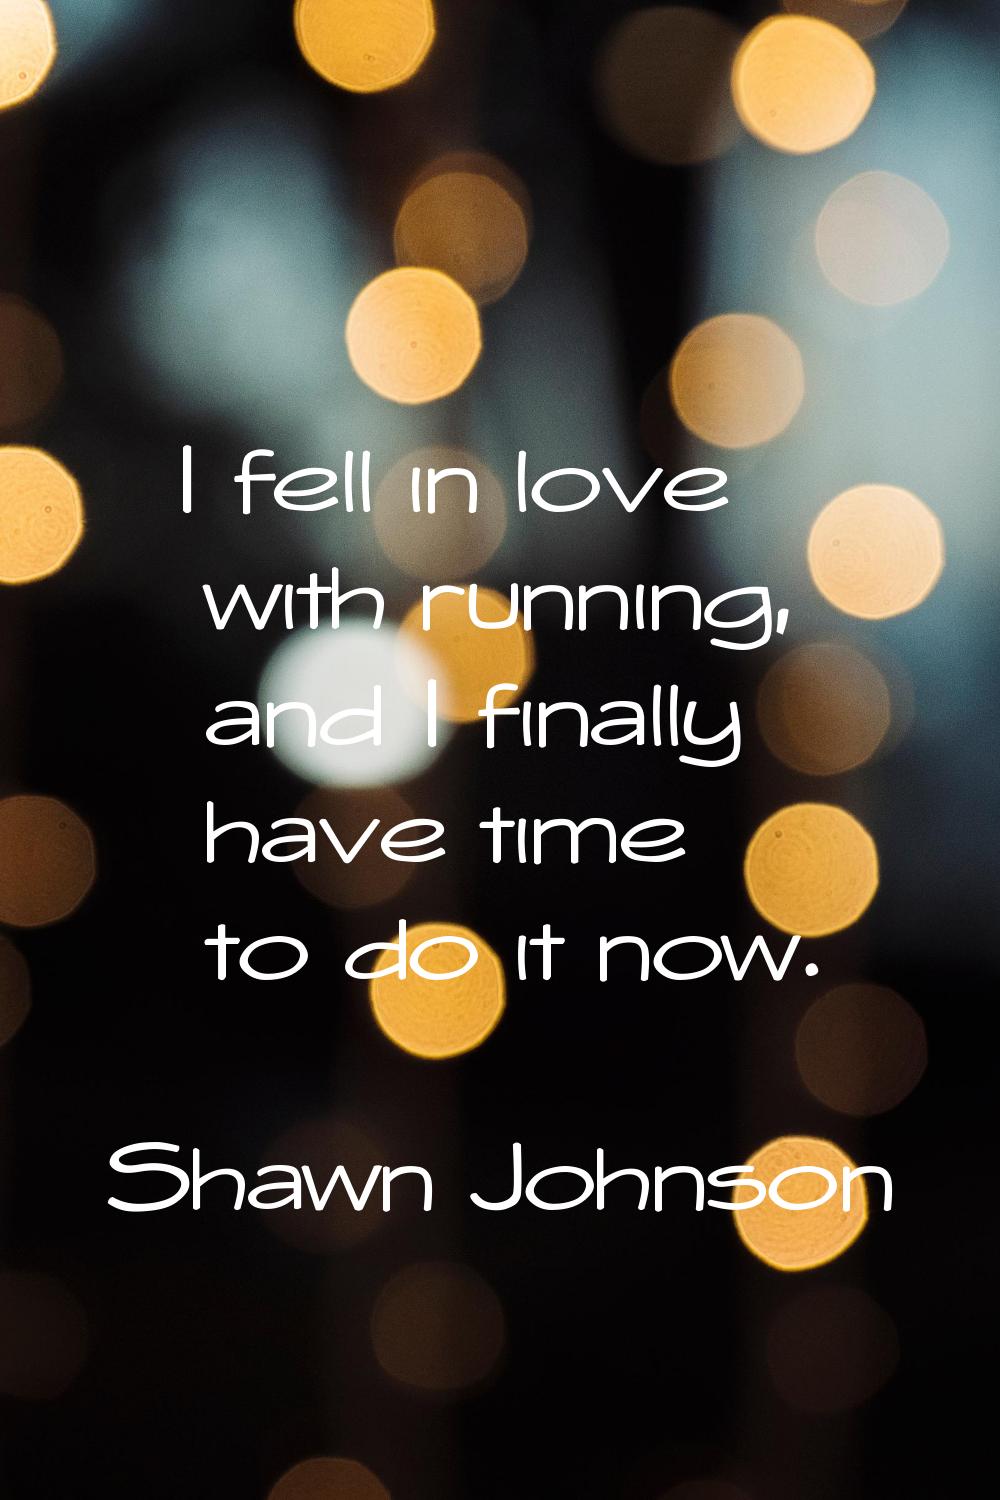 I fell in love with running, and I finally have time to do it now.